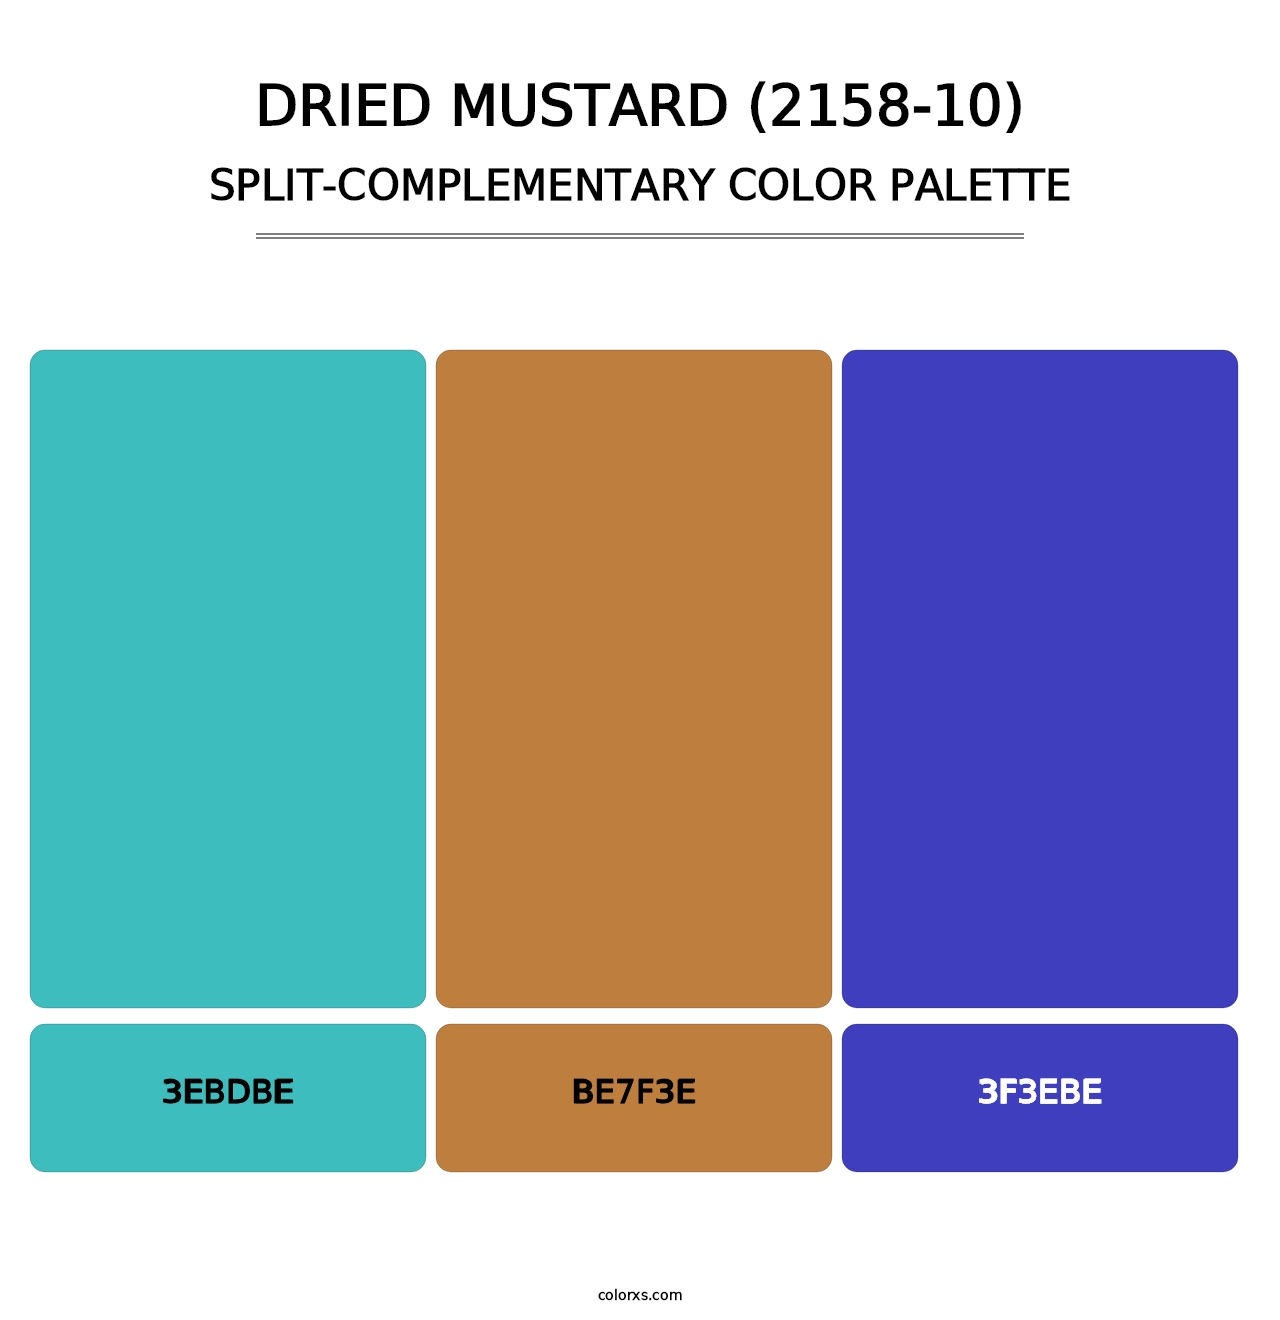 Dried Mustard (2158-10) - Split-Complementary Color Palette